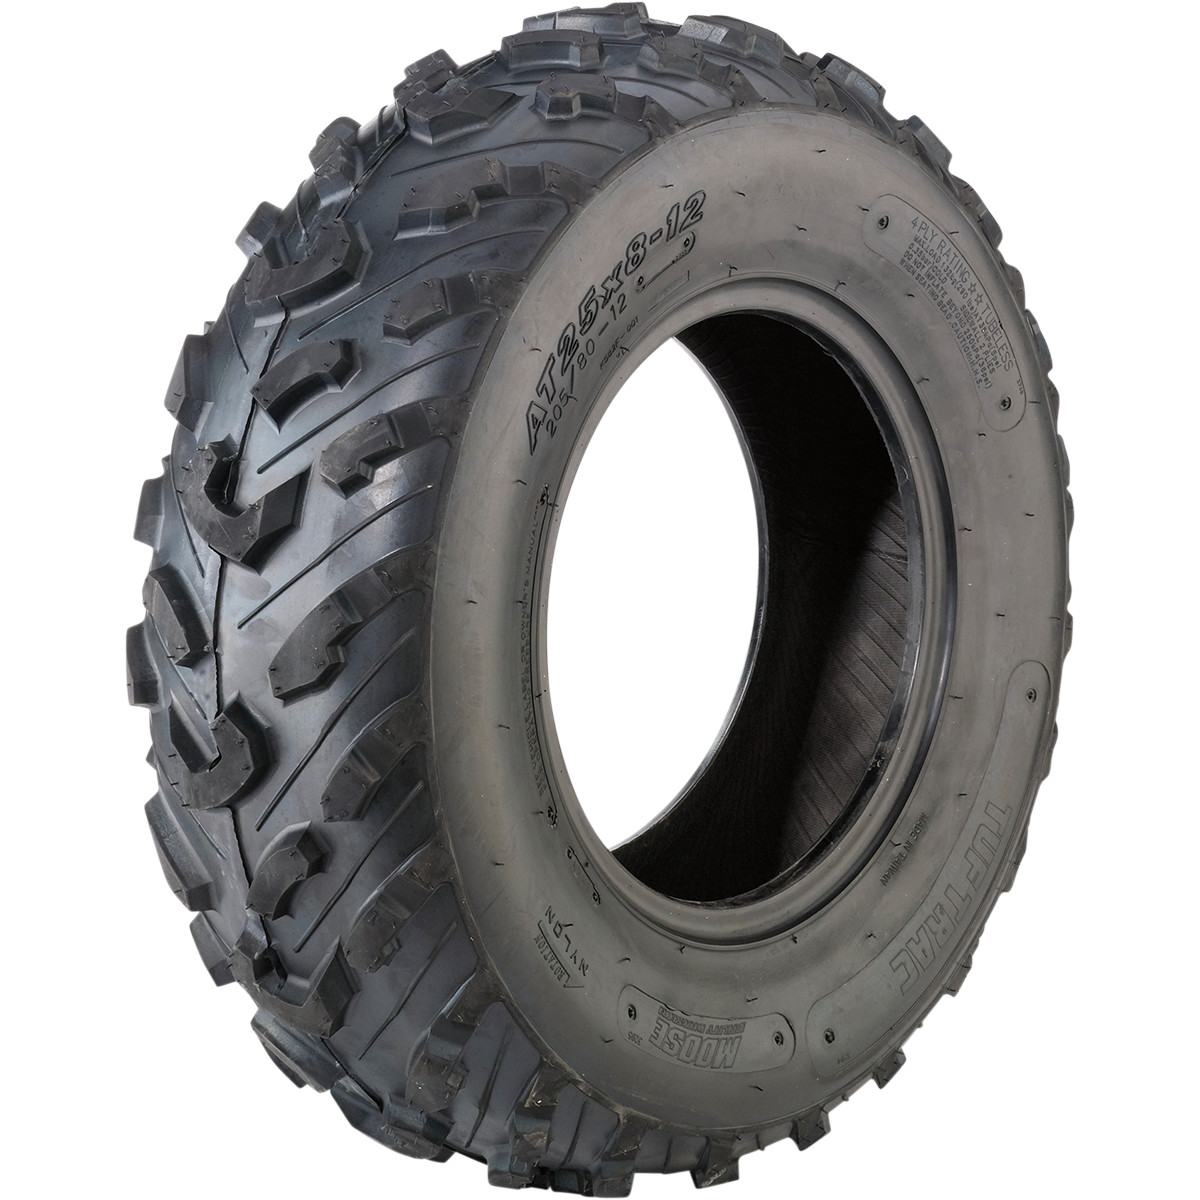 Picture of Yamaha Grizzly 700 Reifen hinten 25X10-12 4P 